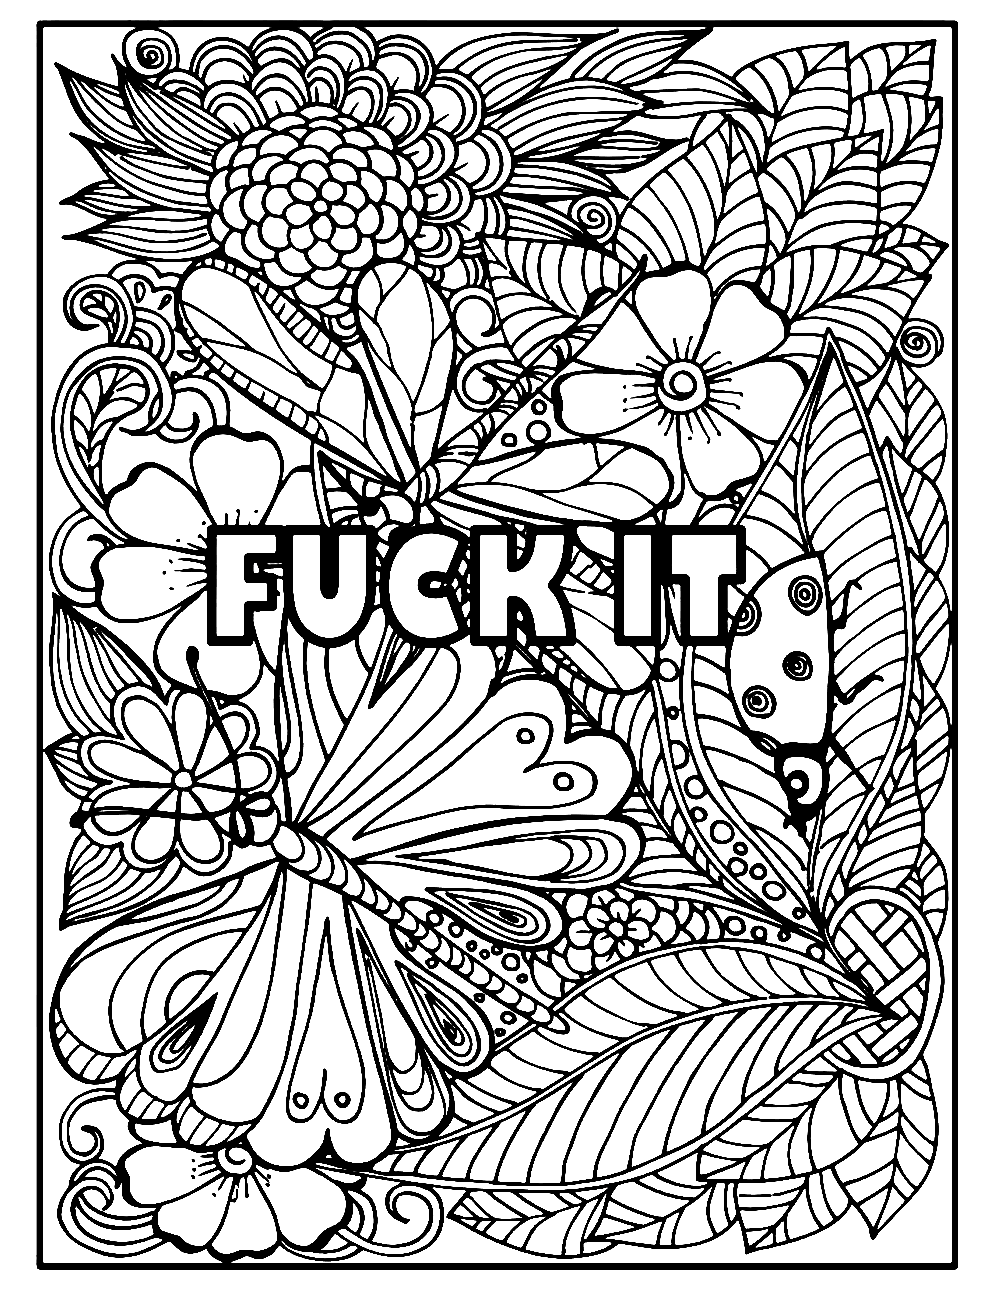 Adult Coloring Page, Cuss, Swear Word, Rude, Obscene, Printable, Adult  Content, Mature, Instant Download, Dumbfuck 